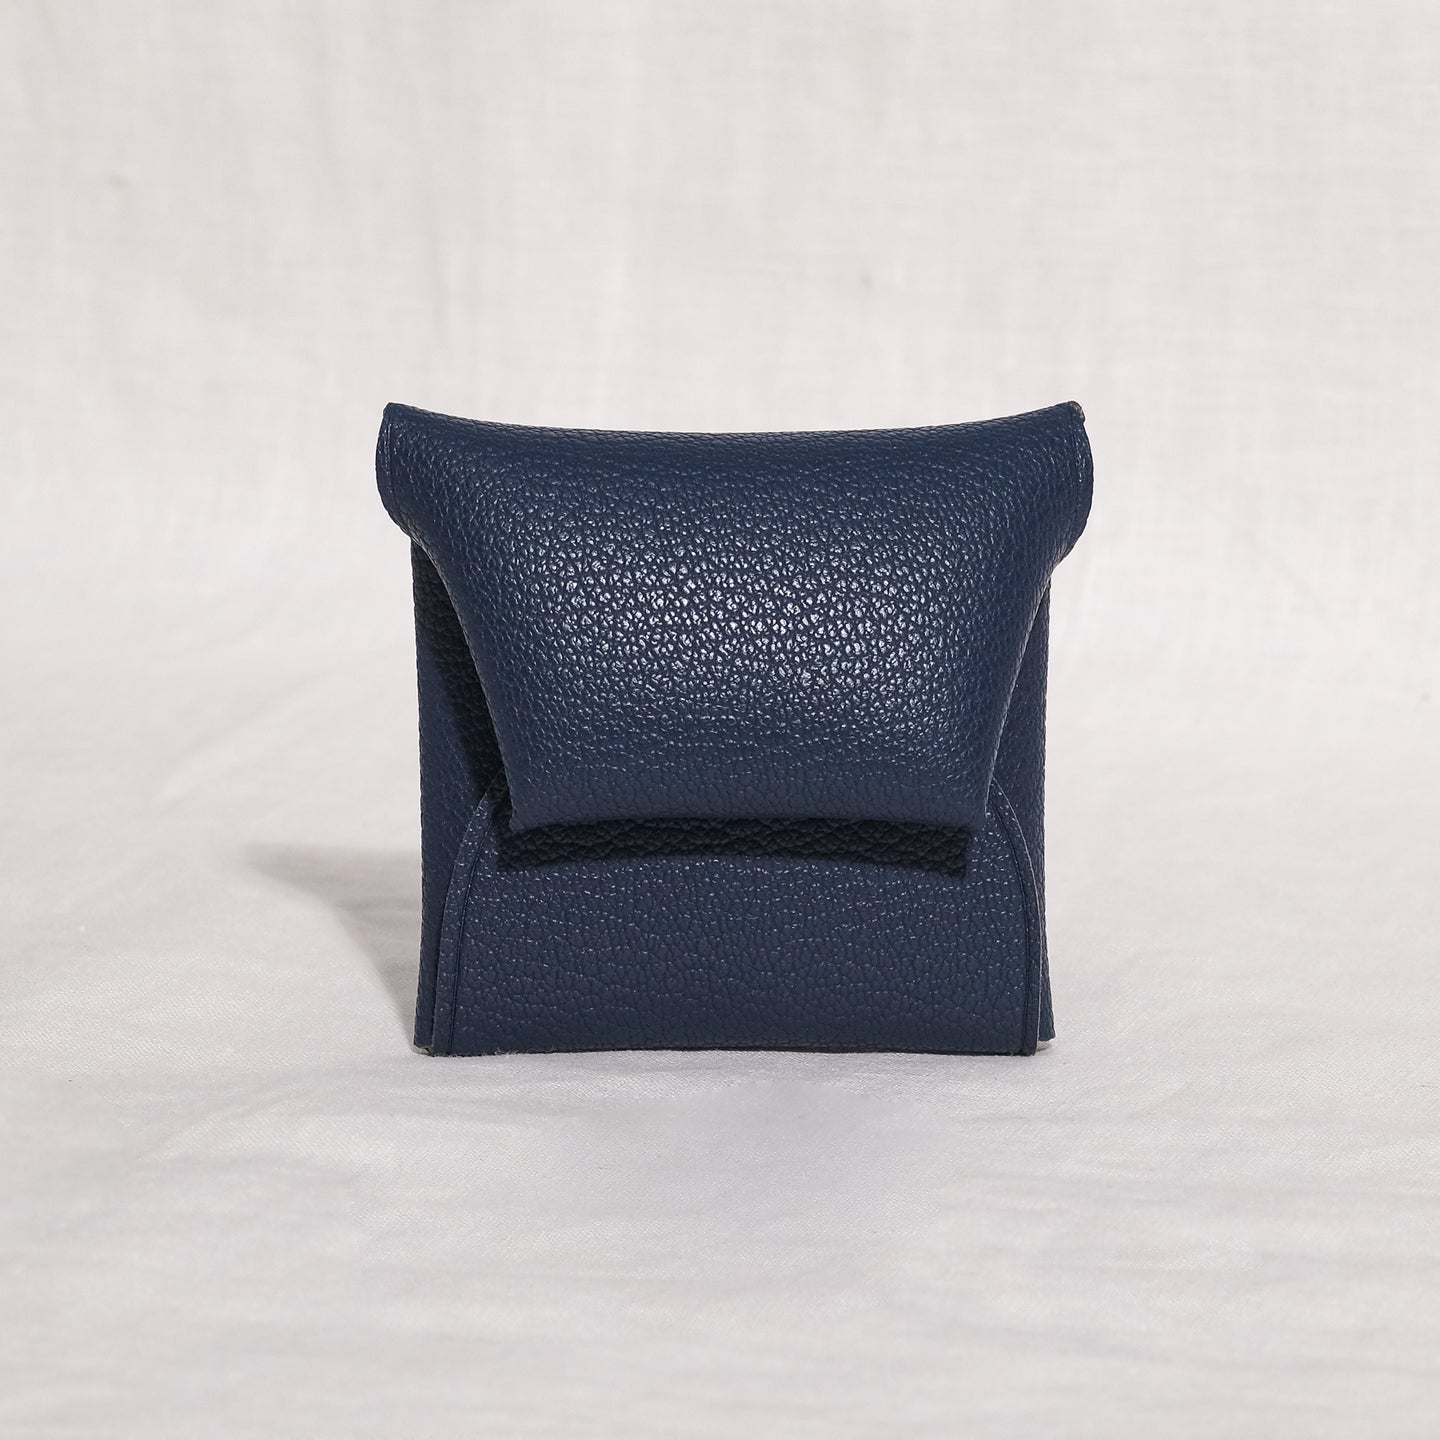 products/coin-purse-navy-1.jpg